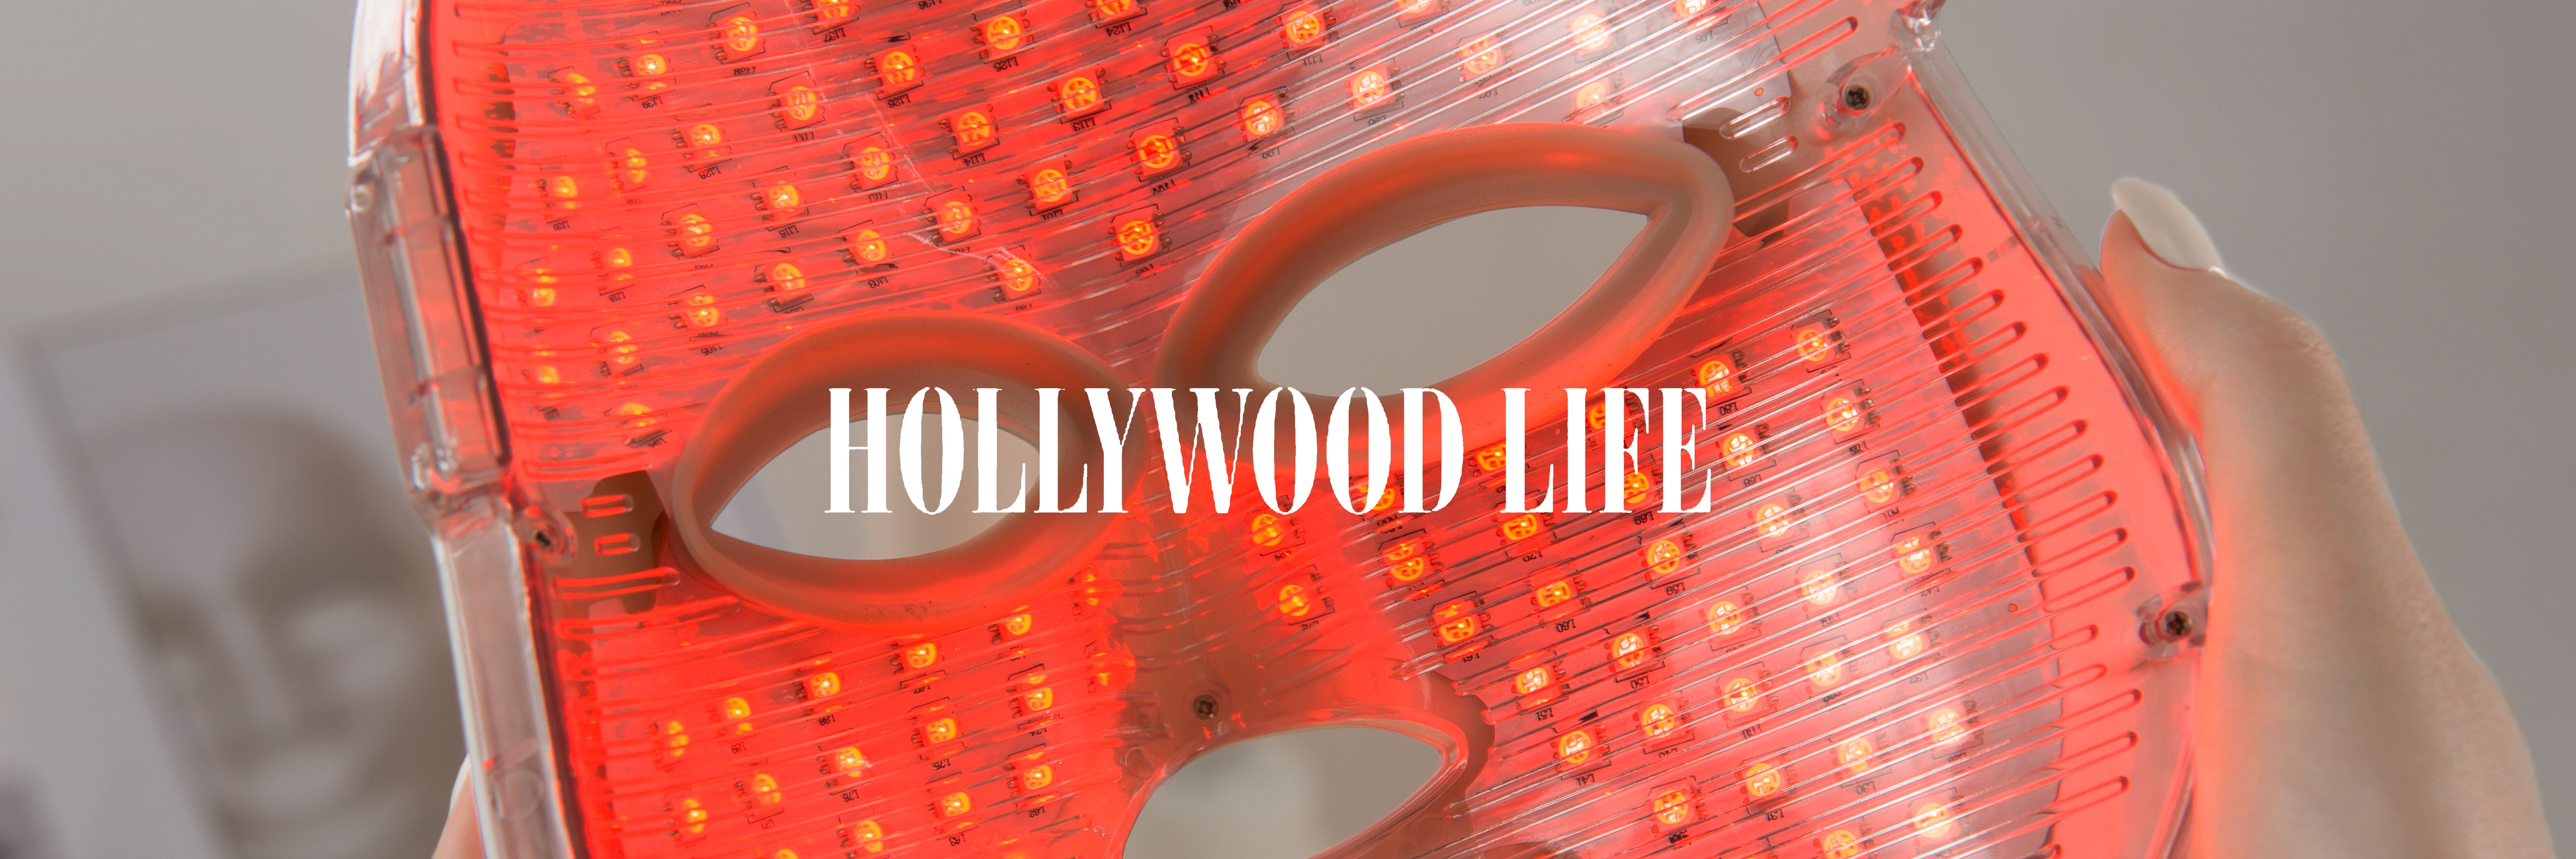 HOLLYWOOD LIFE GIVES A SHOUT-OUT TO OUR LIGHTAURA